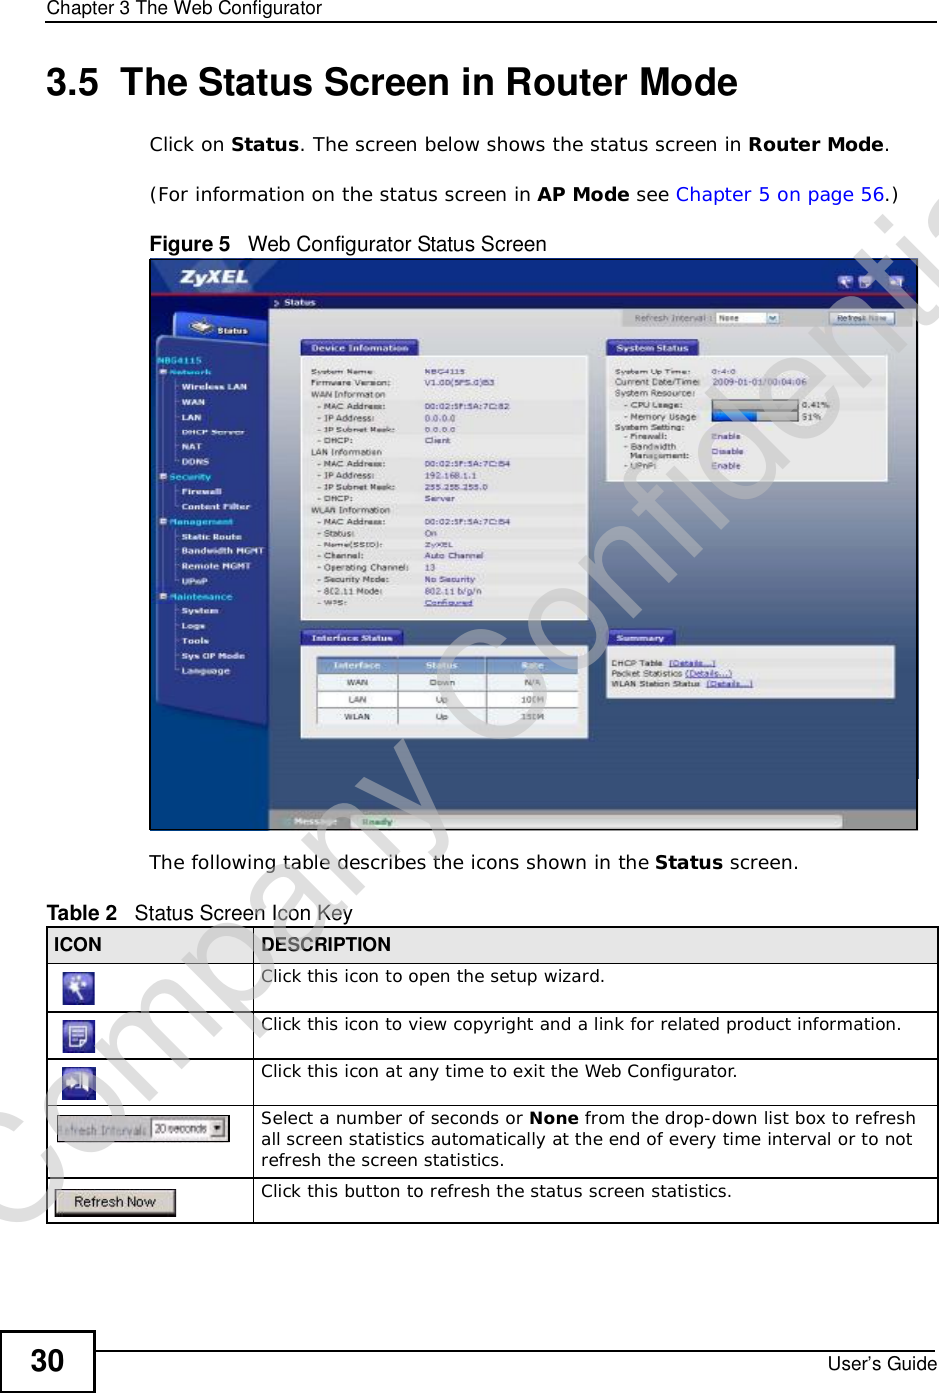 Chapter 3The Web ConfiguratorUser’s Guide303.5  The Status Screen in Router ModeClick on Status. The screen below shows the status screen in Router Mode.(For information on the status screen in AP Mode see Chapter 5 on page 56.)Figure 5   Web Configurator Status Screen The following table describes the icons shown in the Status screen.Table 2   Status Screen Icon Key ICON DESCRIPTIONClick this icon to open the setup wizard. Click this icon to view copyright and a link for related product information.Click this icon at any time to exit the Web Configurator.Select a number of seconds or None from the drop-down list box to refresh all screen statistics automatically at the end of every time interval or to not refresh the screen statistics.Click this button to refresh the status screen statistics.Company Confidential